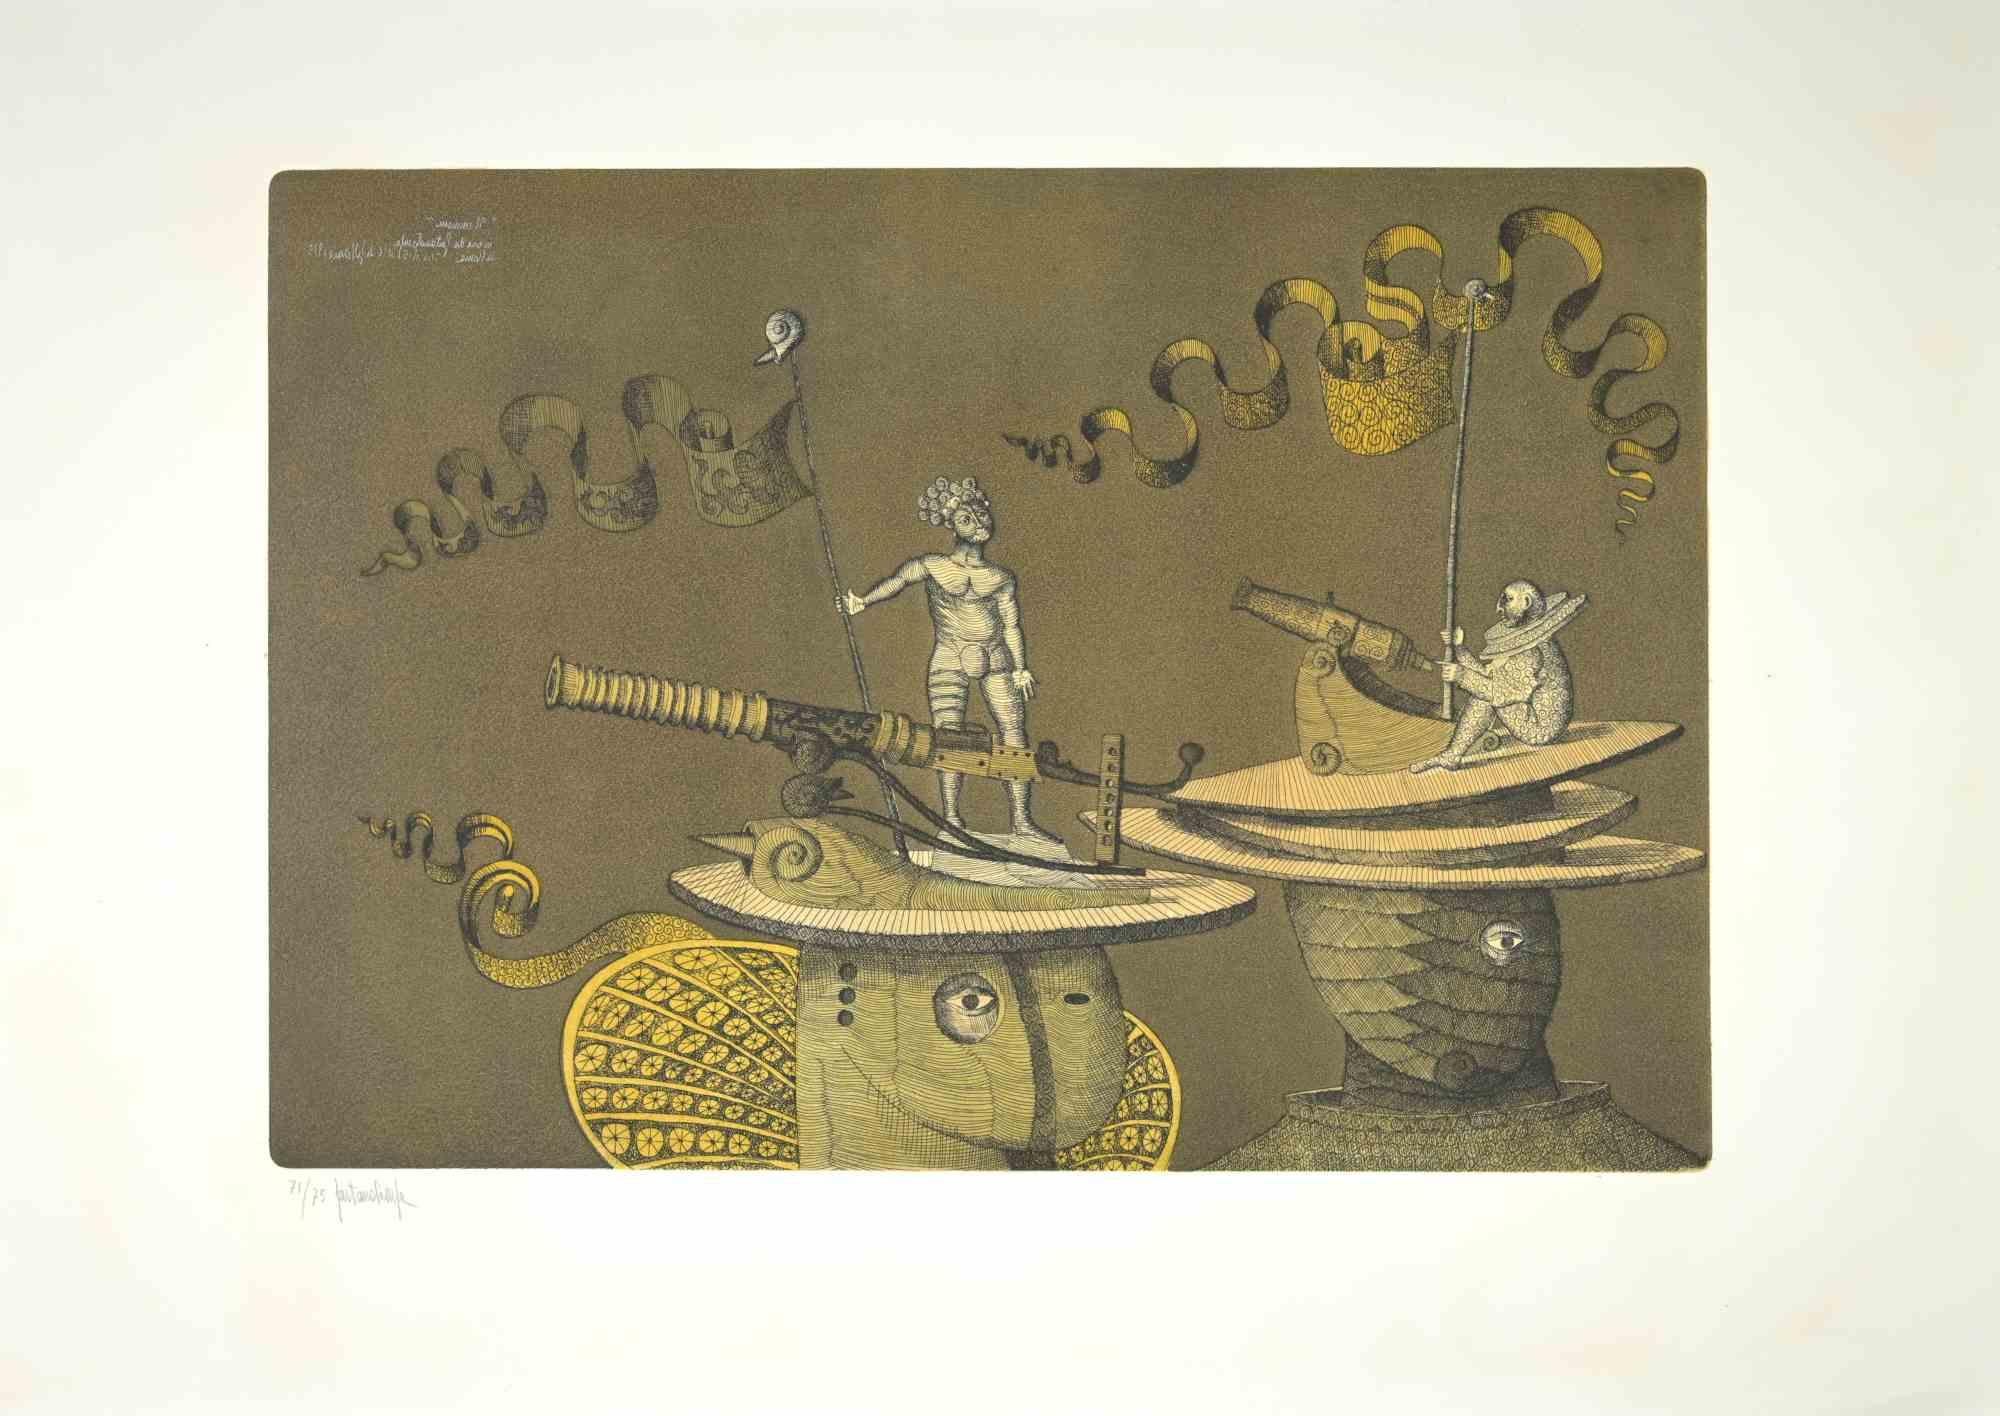 The Imaginary Men -  Etching by Gaetano Pompa - 1970s